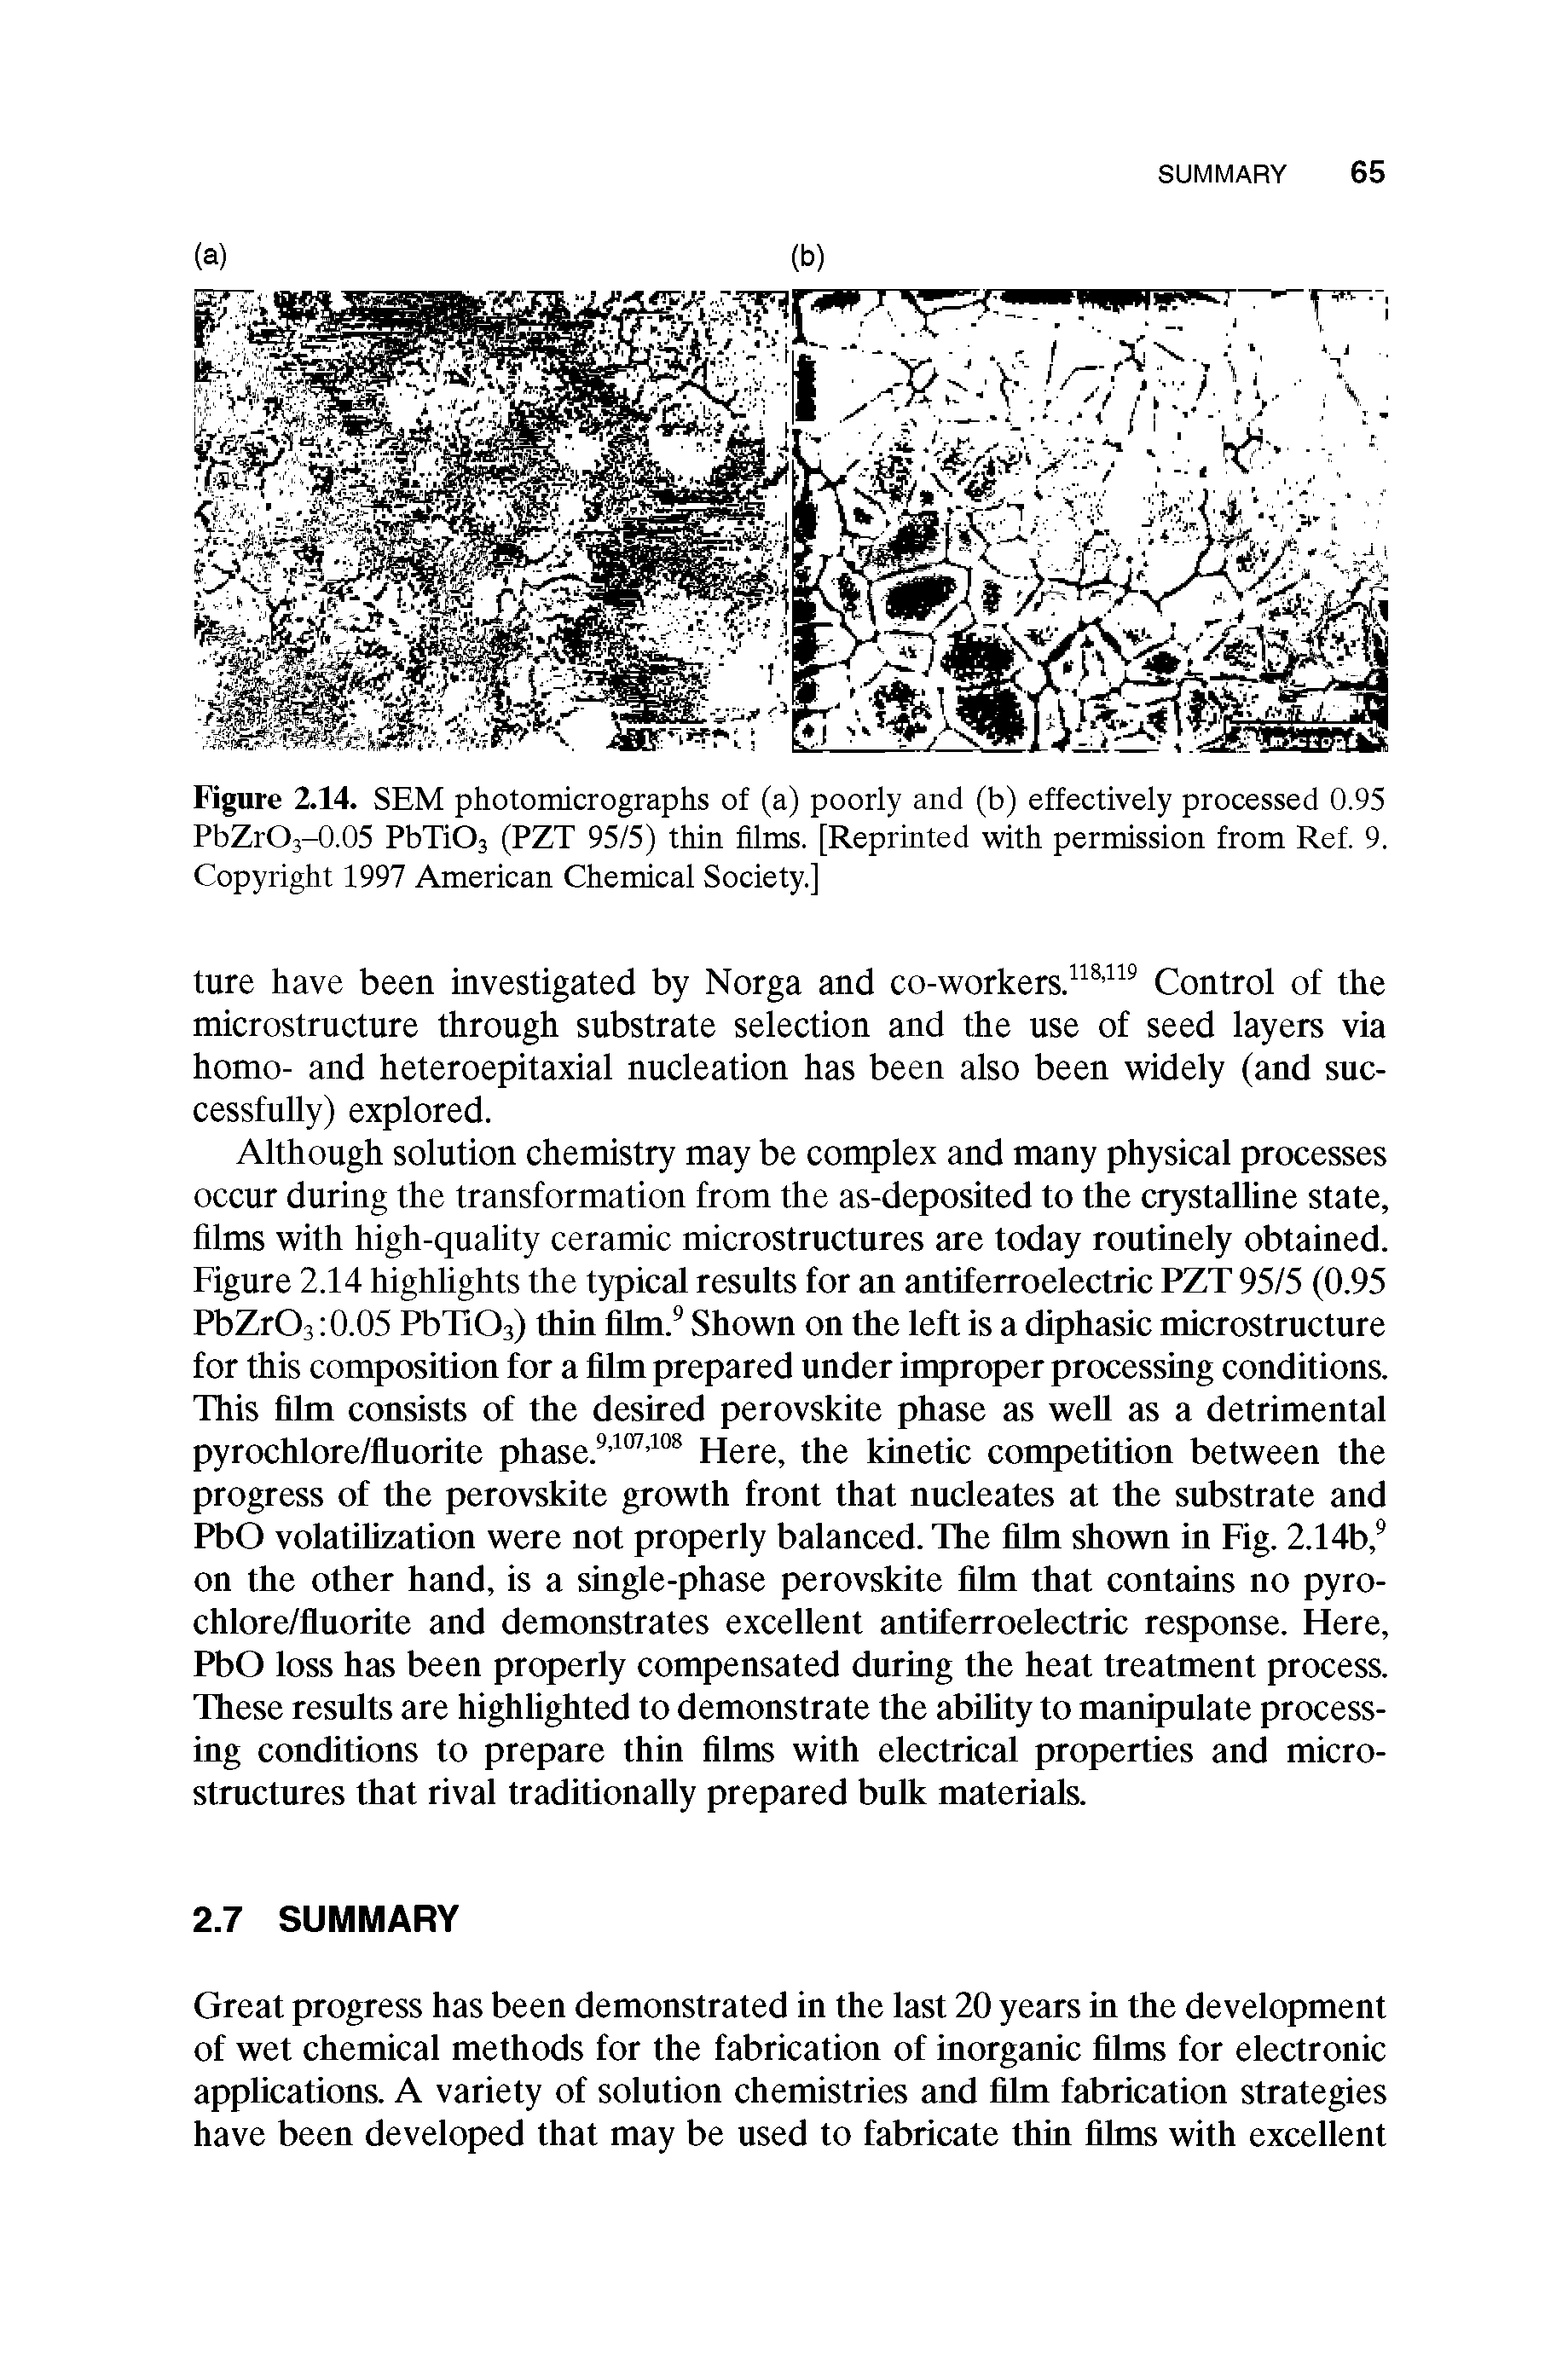 Figure 2.14. SEM photomicrographs of (a) poorly and (b) effectively processed 0.95 PbZrO3-0.05 PbTi03 (PZT 95/5) thin films. [Reprinted with permission from Ref. 9. Copyright 1997 American Chemical Society.]...